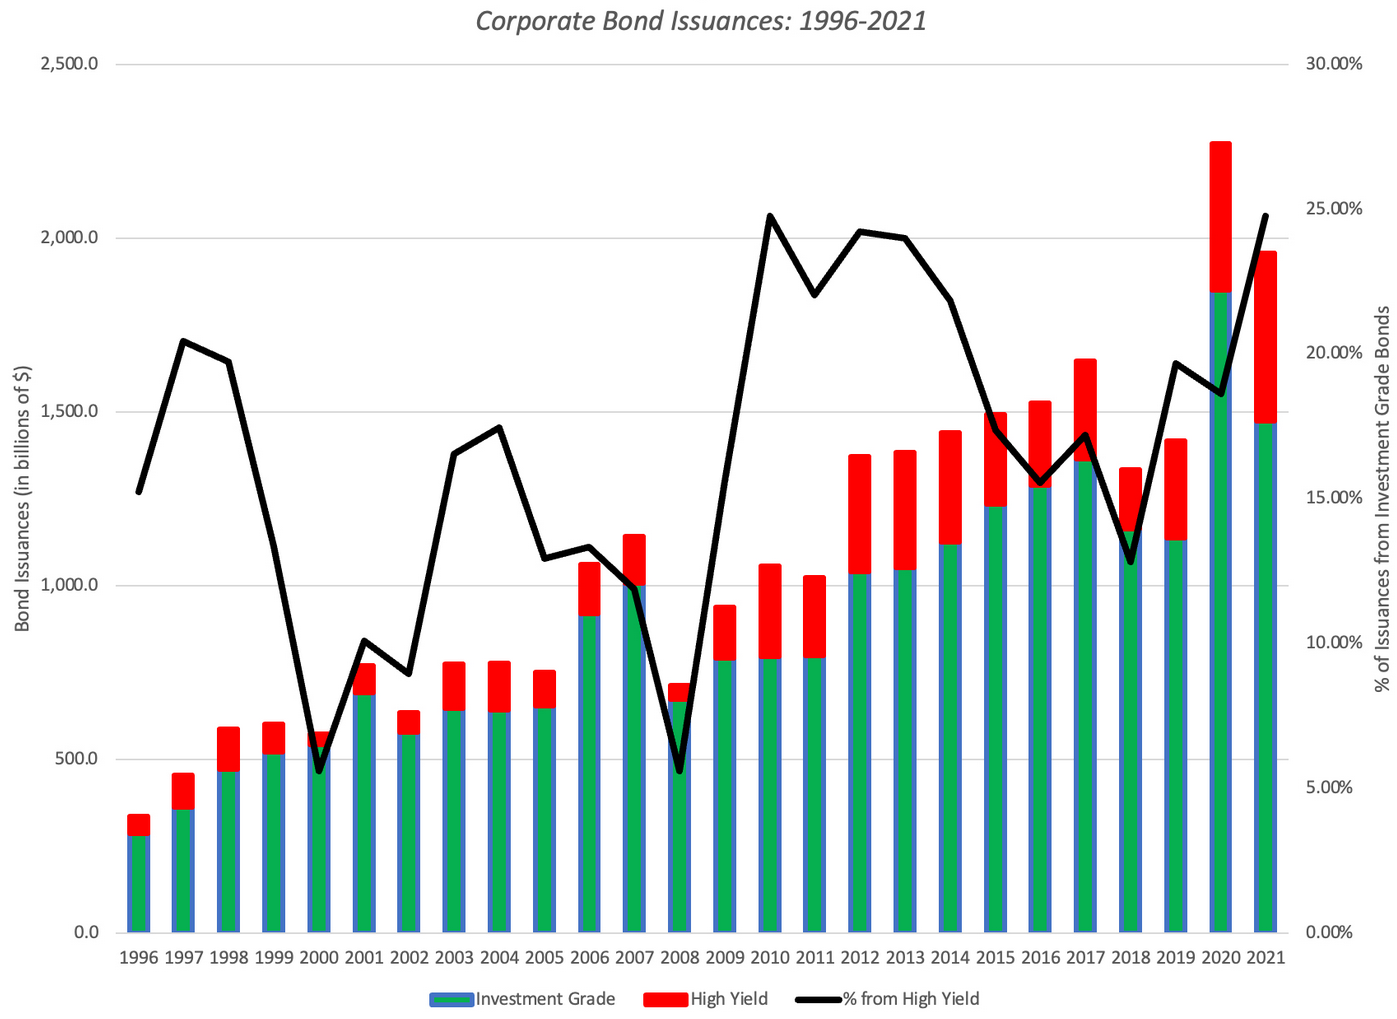 corporate bond offerings, broken down into investment grade and high yield, by year, from 1996 to 2021